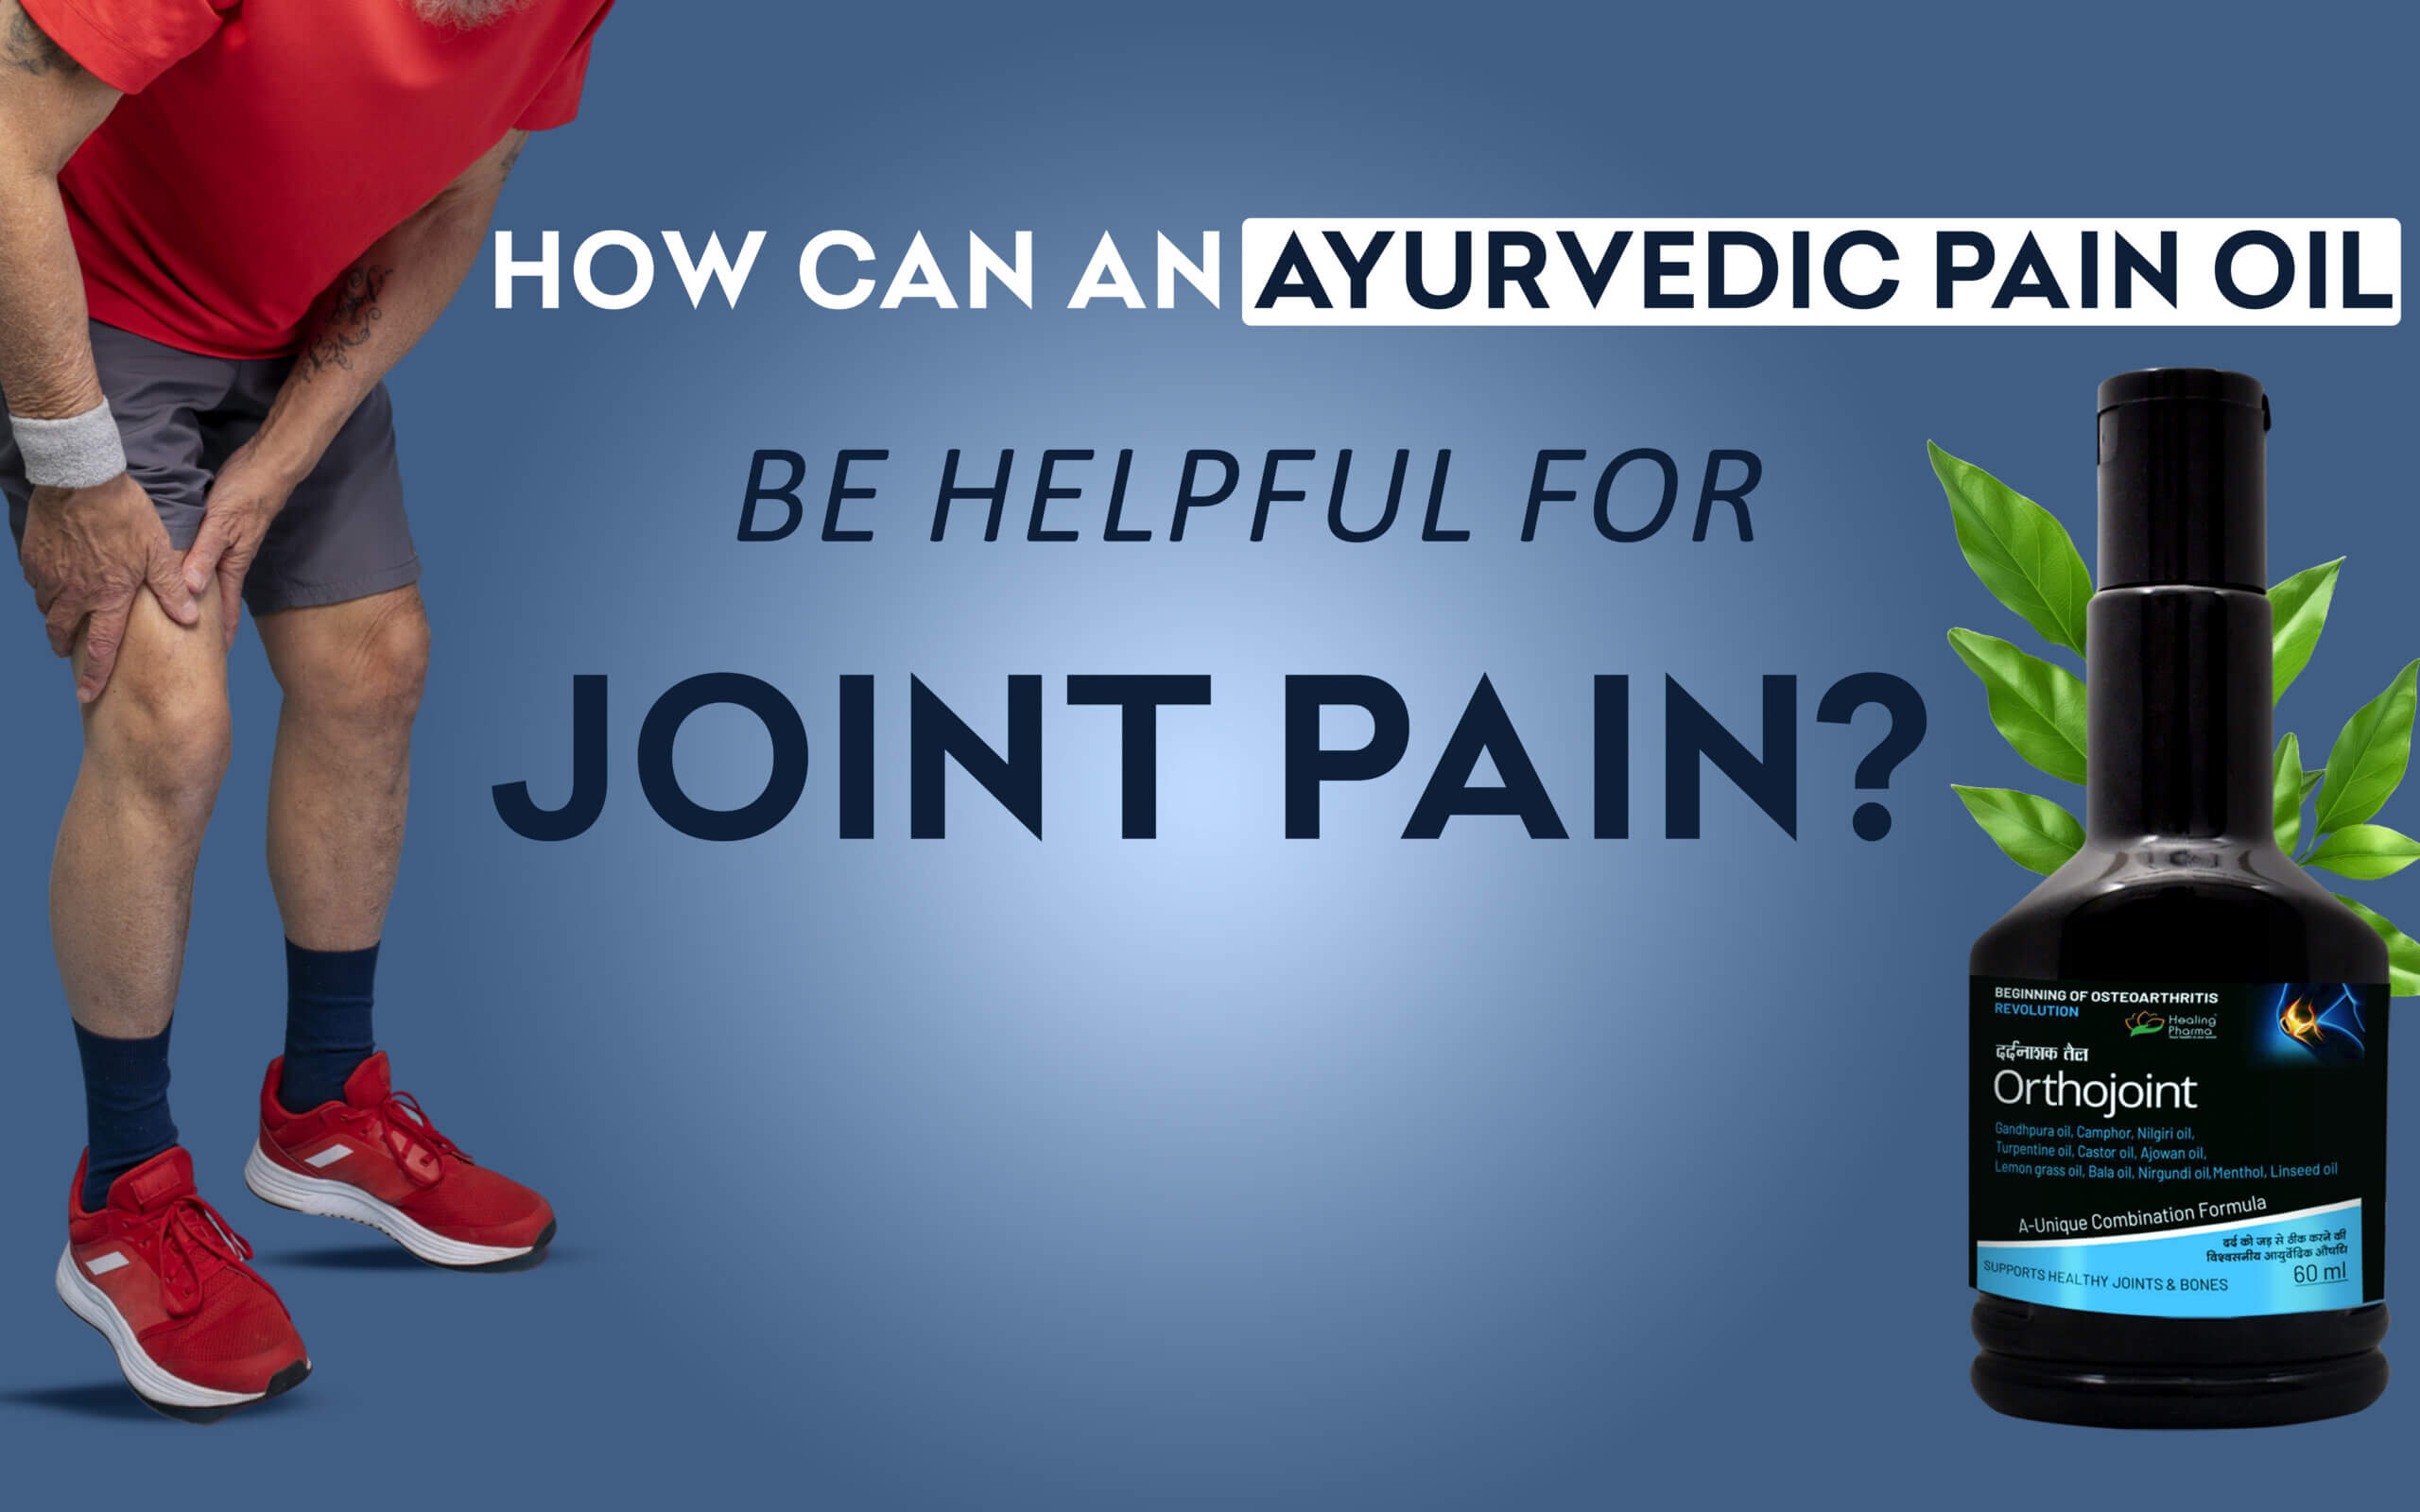 Ayurvedic Pain Oil Be Helpful For Joint Pain